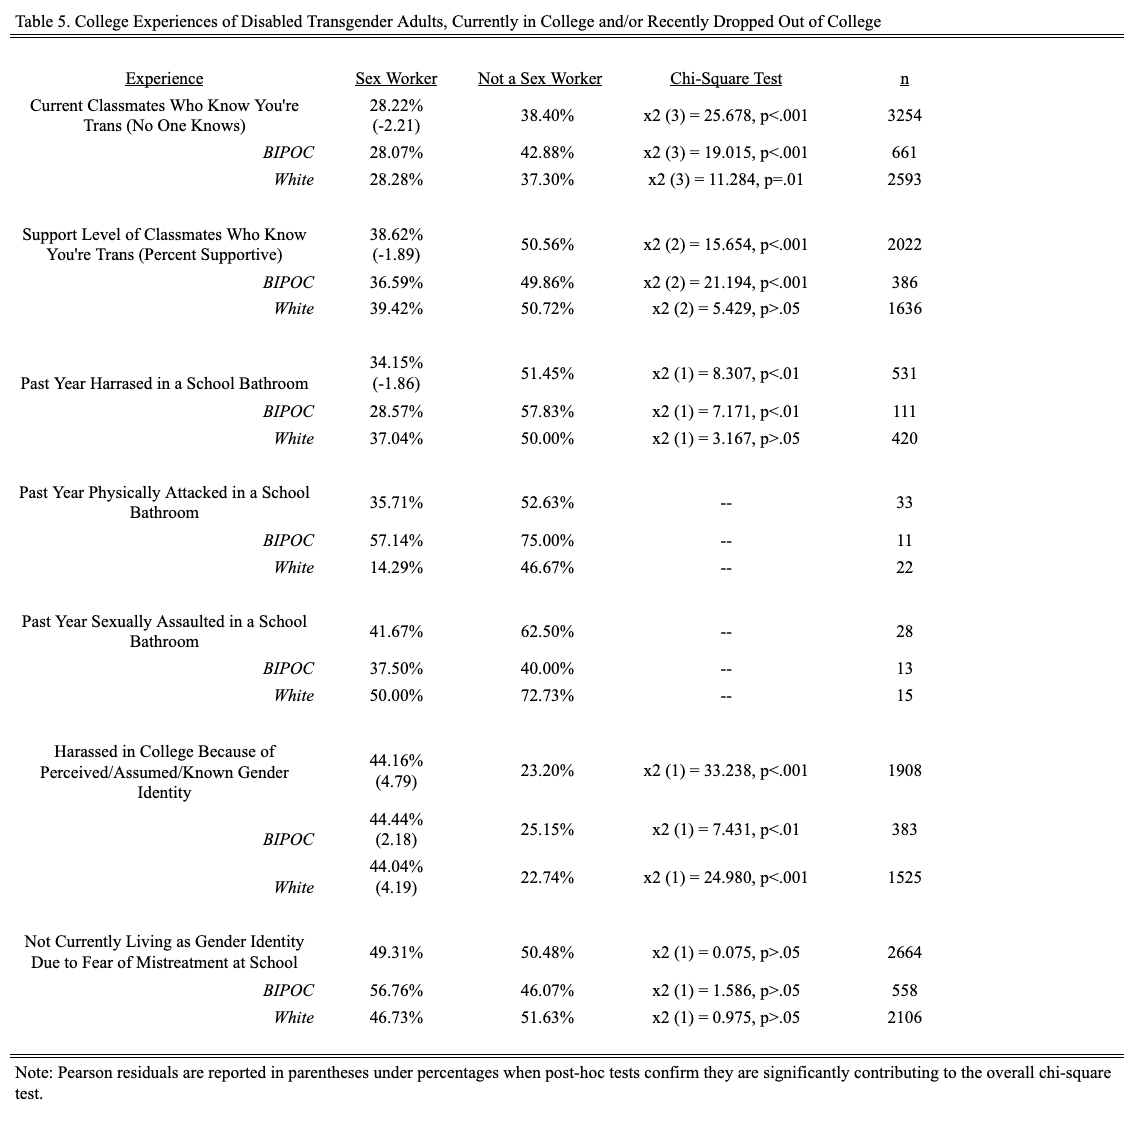 Table of college experiences of transgender adults, currently in college and/or recently dropped out of college. The categories are experience, whether or no the participant is a sex worker, chi-square test, and n. Each answer to the question of experience is seperated into two categories: white and BIPOC. More description below.